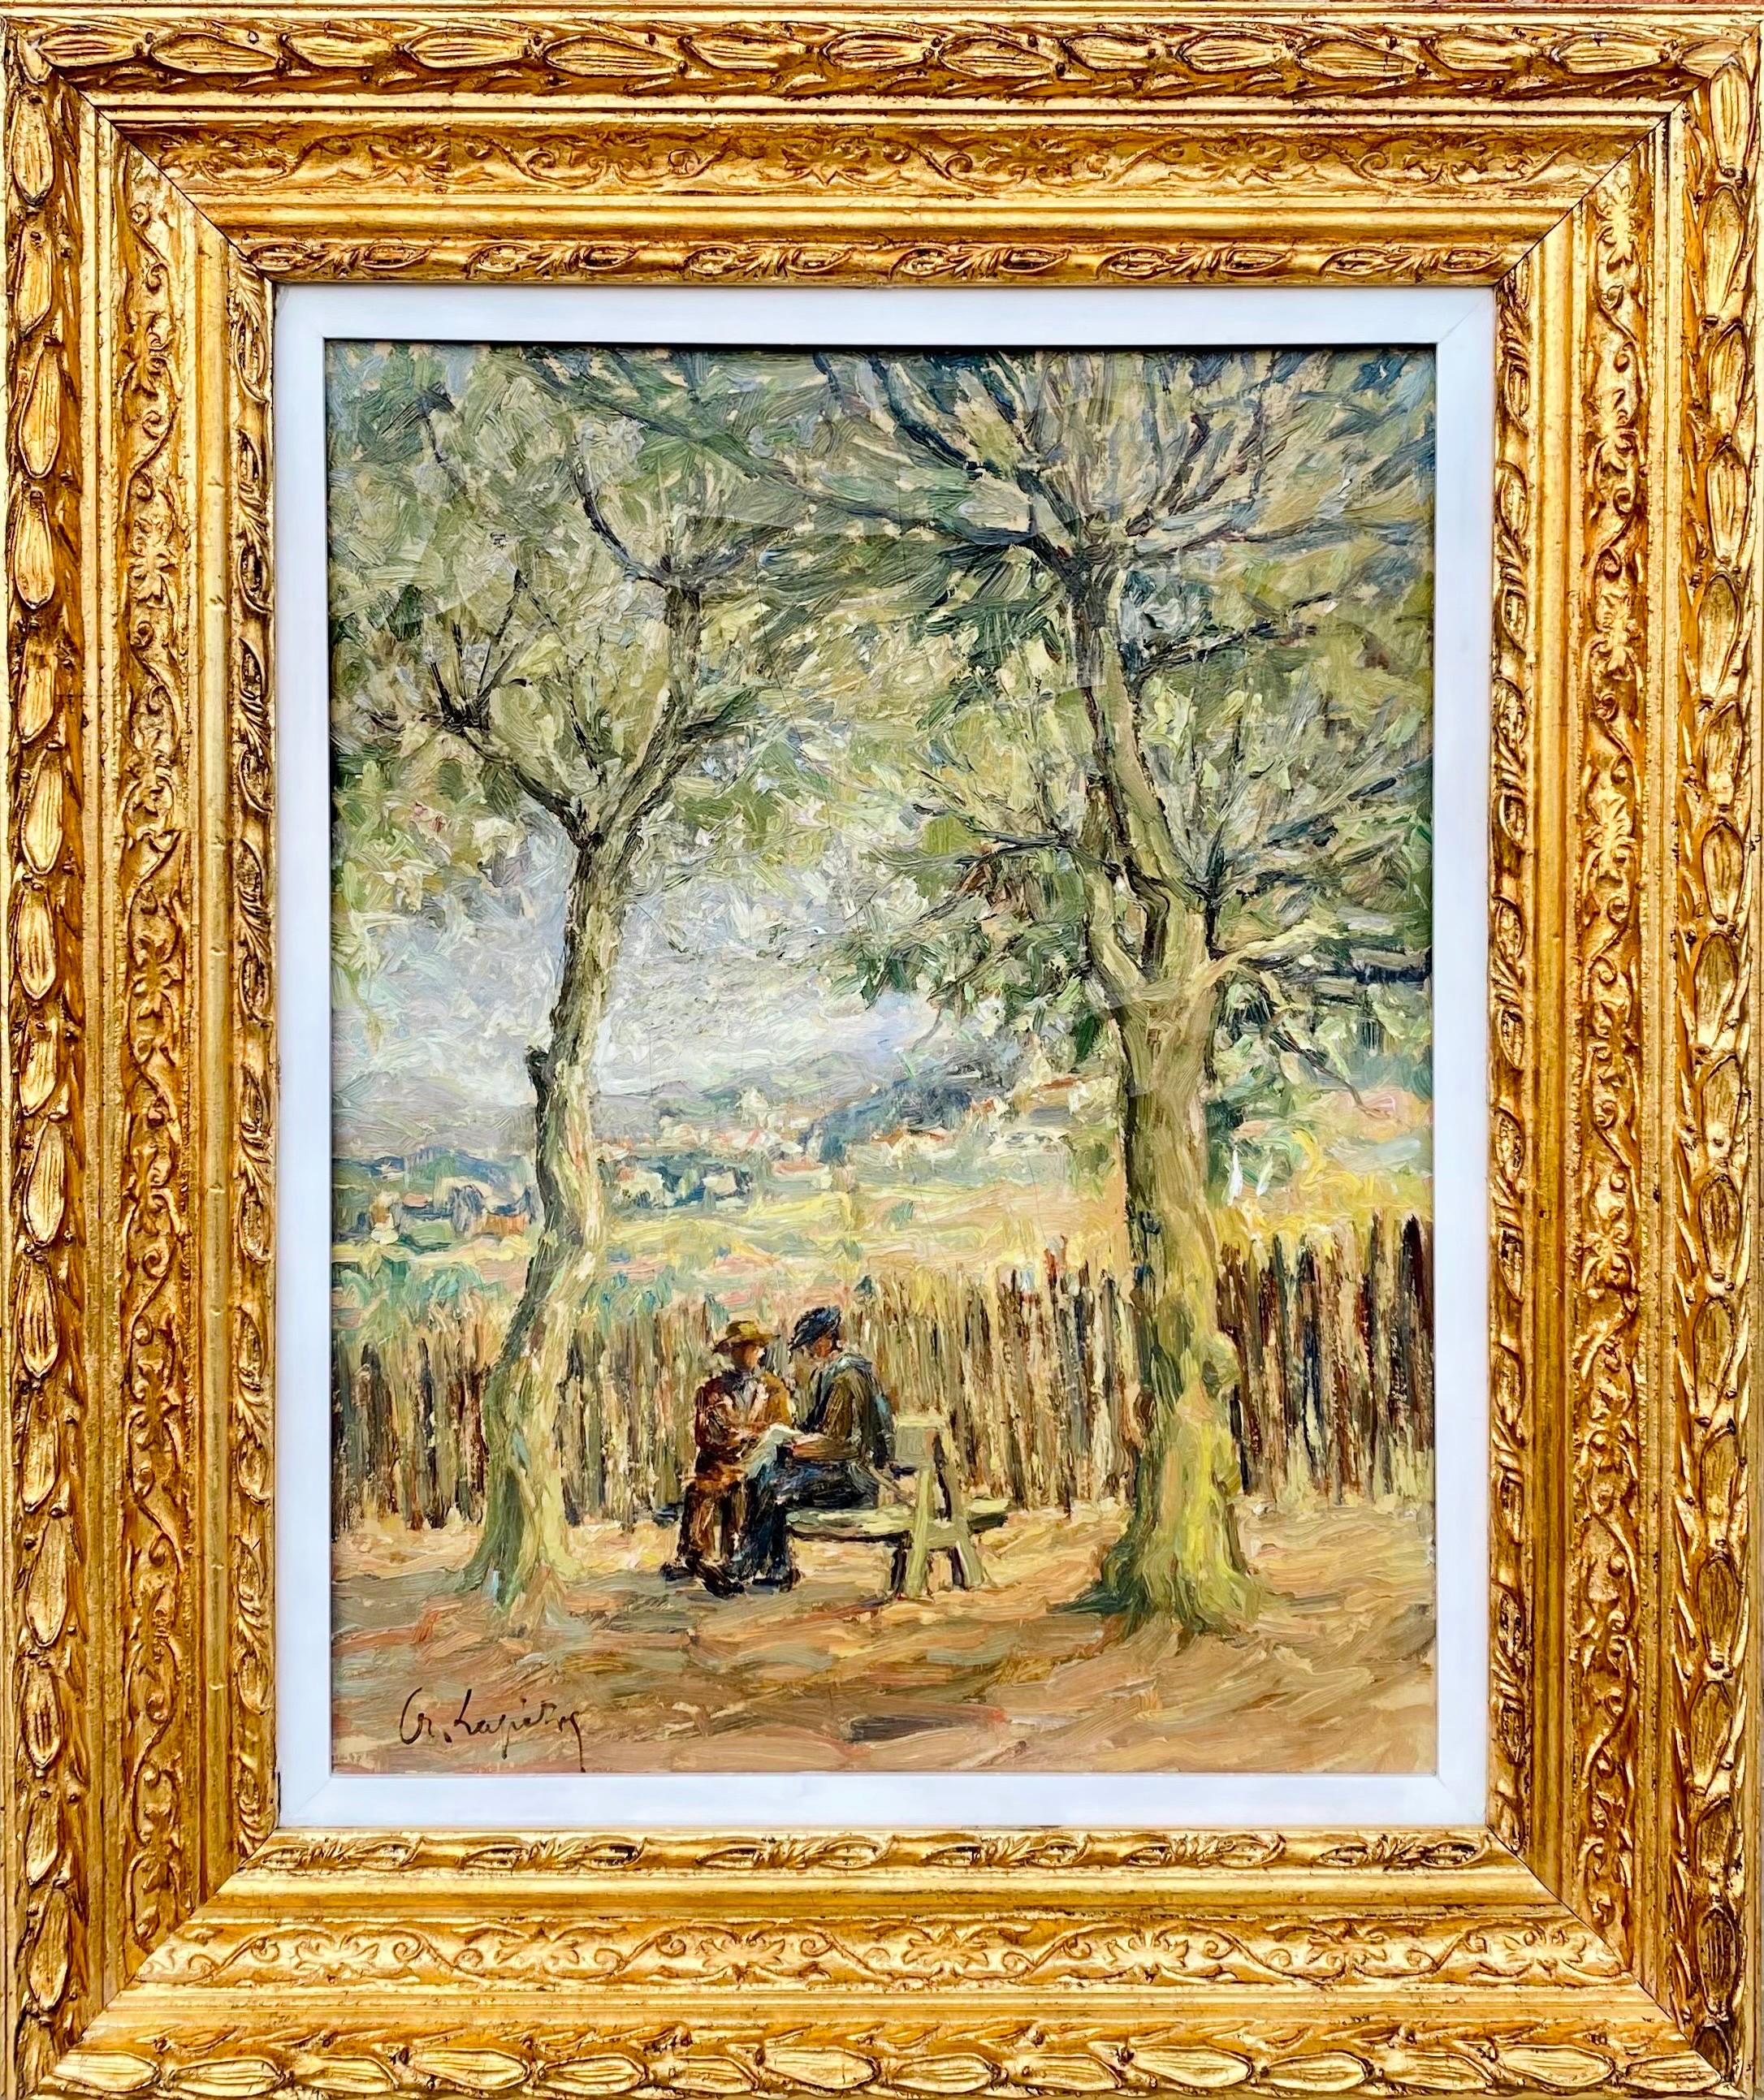 Unknown Figurative Painting - French 19th century impressionist painting - Les paysans - Countryside Monet